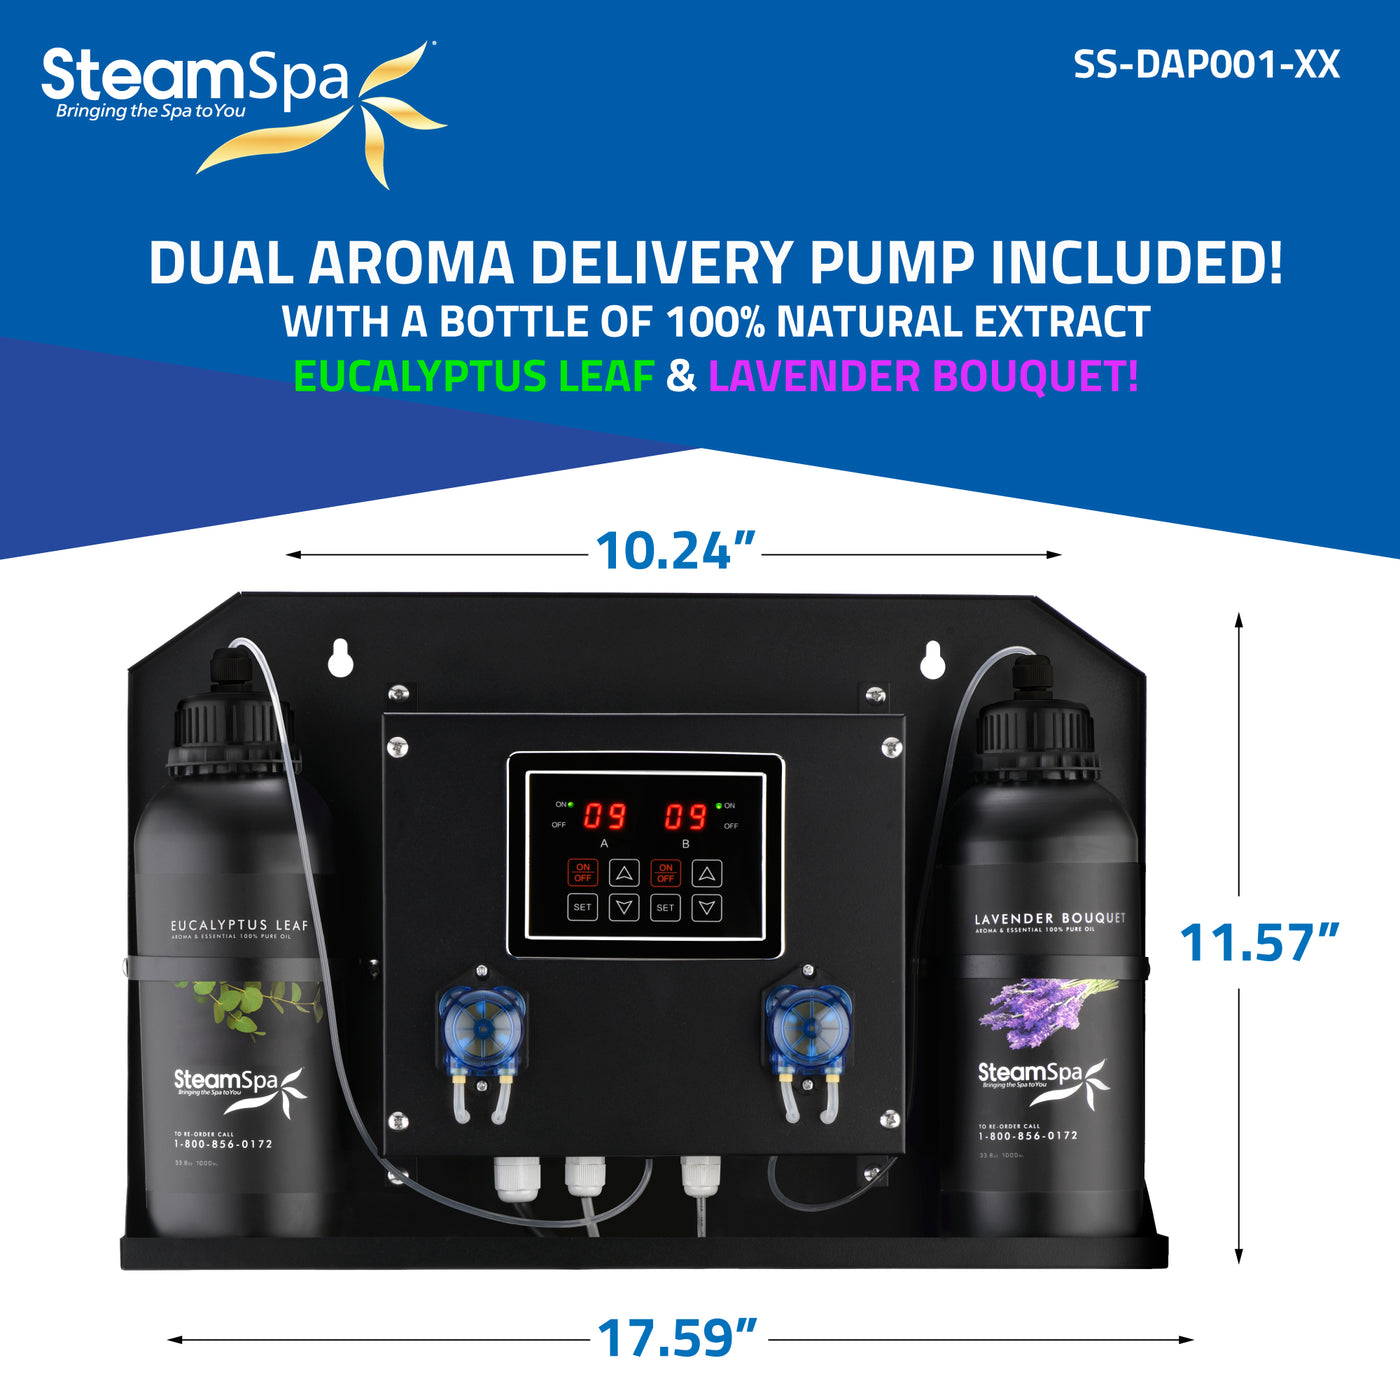 Black Series WiFi and Bluetooth 2 x 9kW QuickStart Steam Bath Generator Package with Dual Aroma Pump in Polished Chrome BKT1800CH-ADP